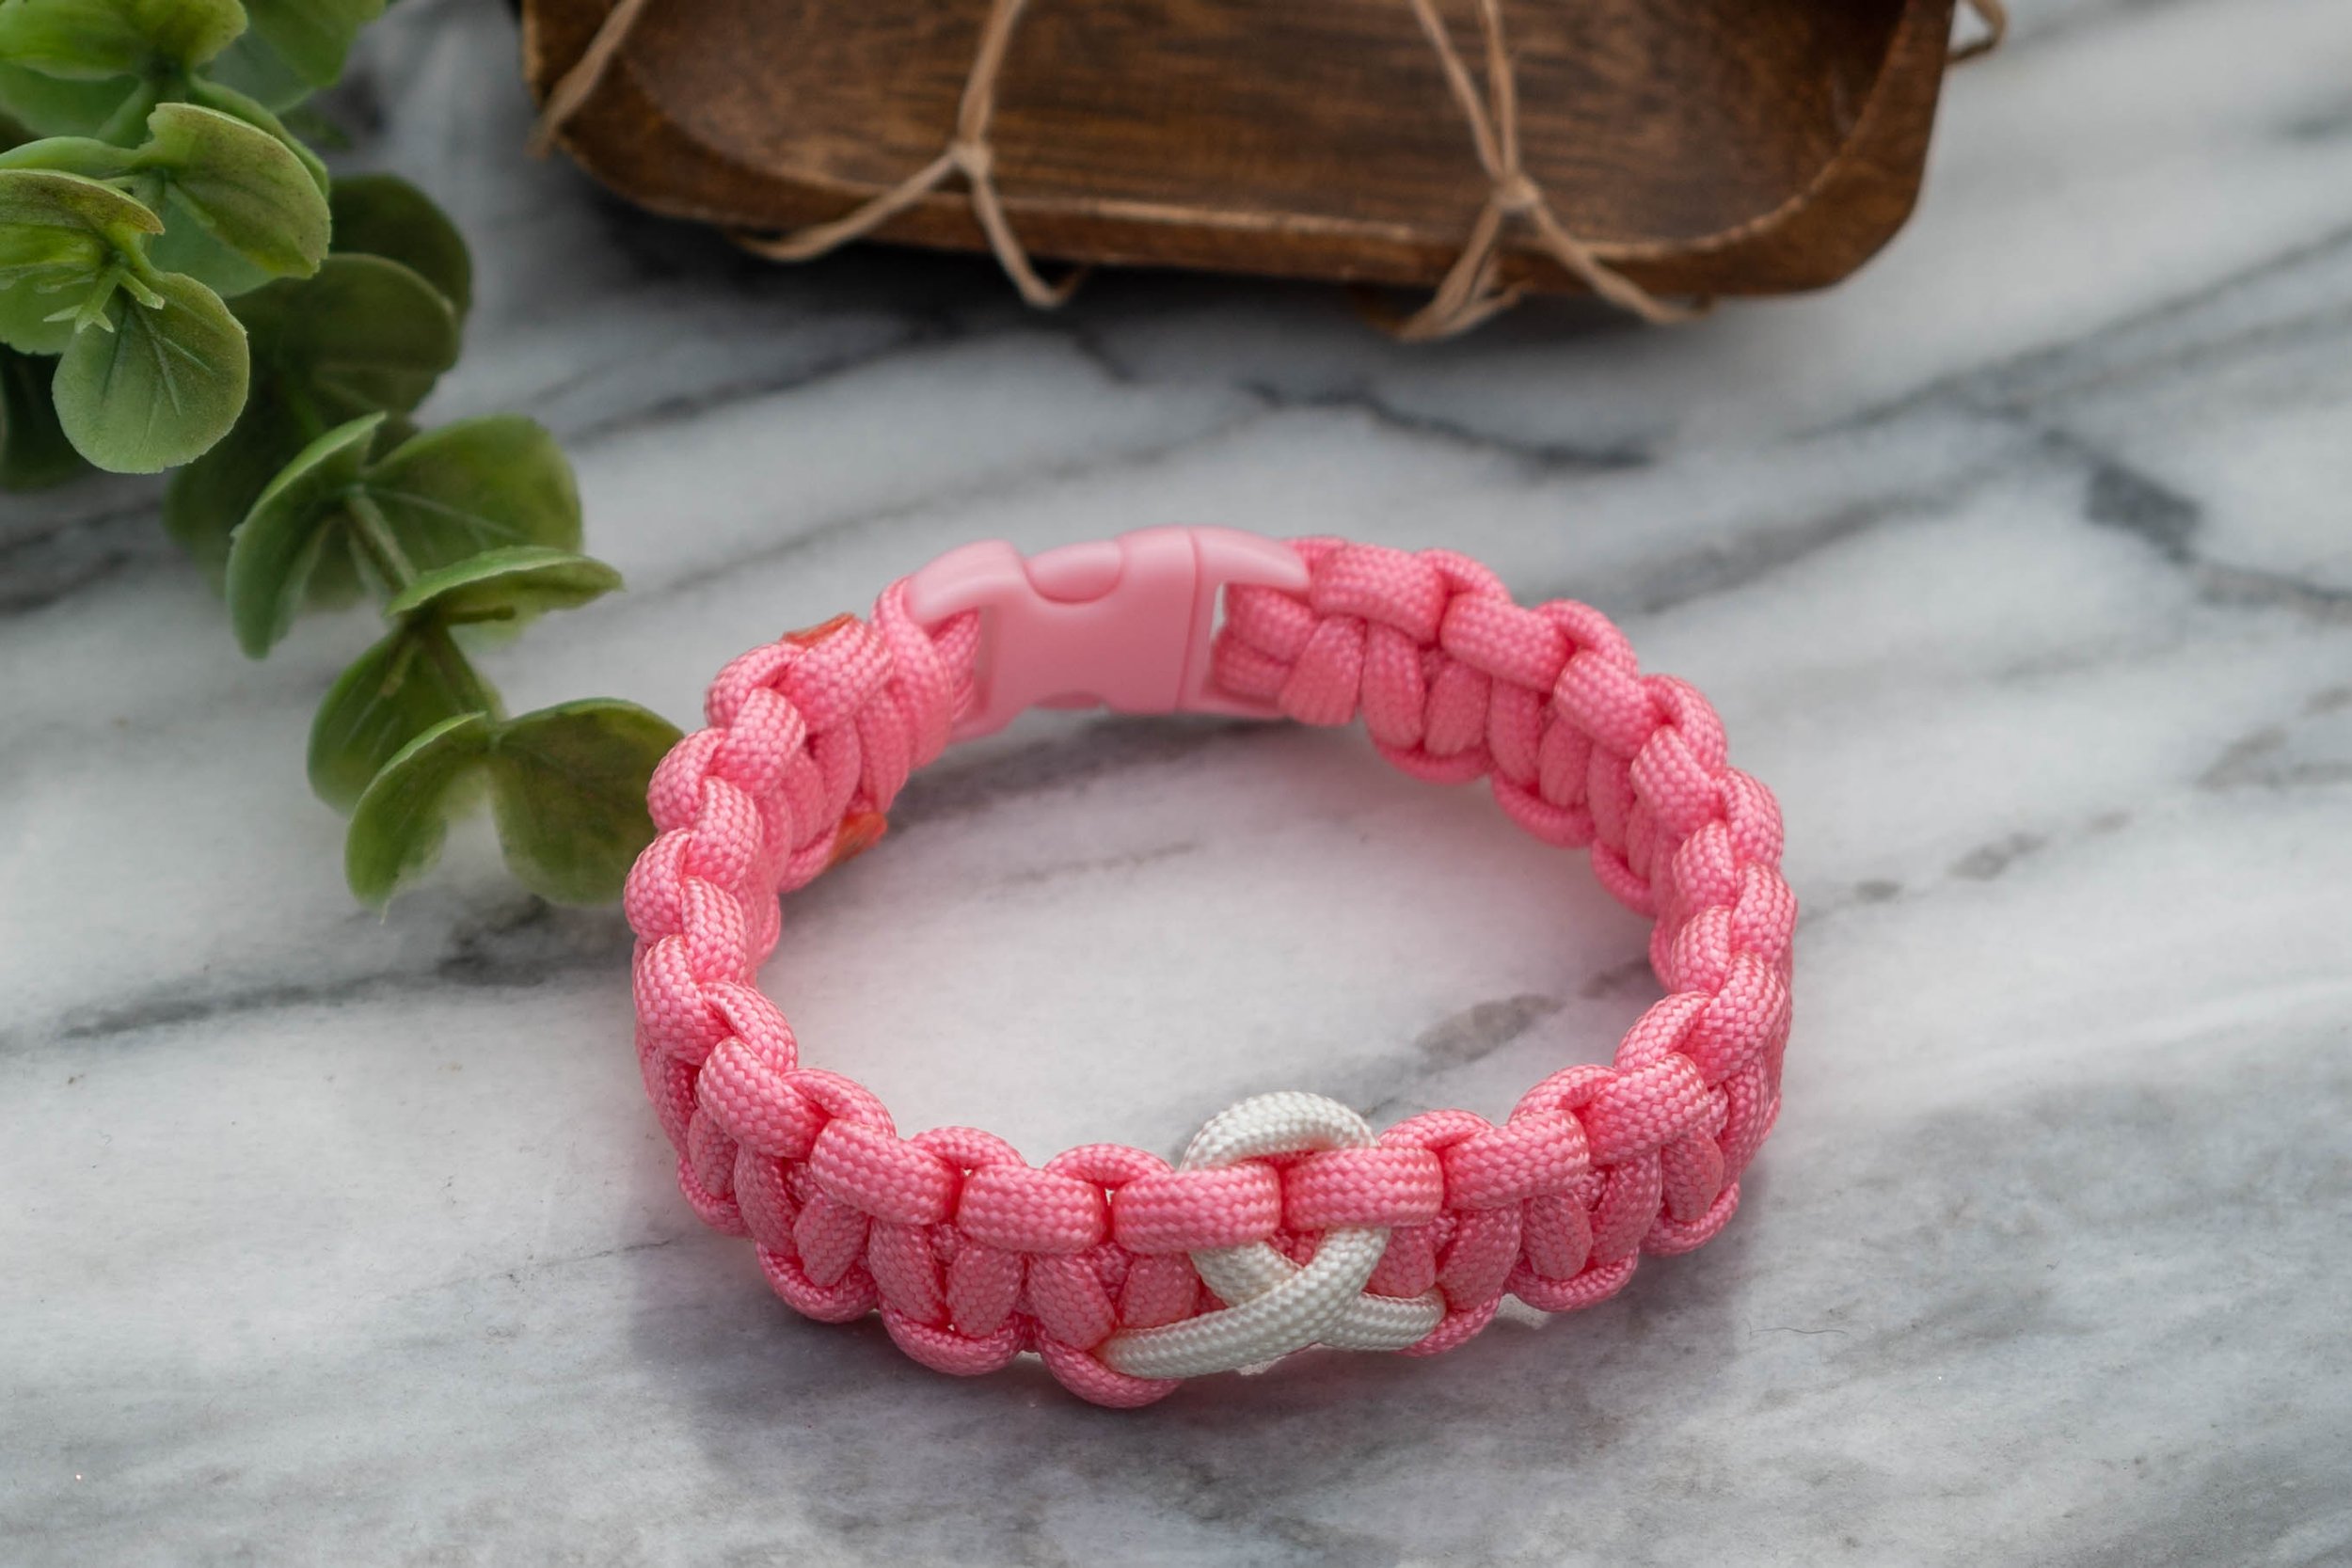 Help! How in the world to make this? Looks to be tri-color paracord bracelet.  I have no idea how to make this with 3 cord. : r/paracord